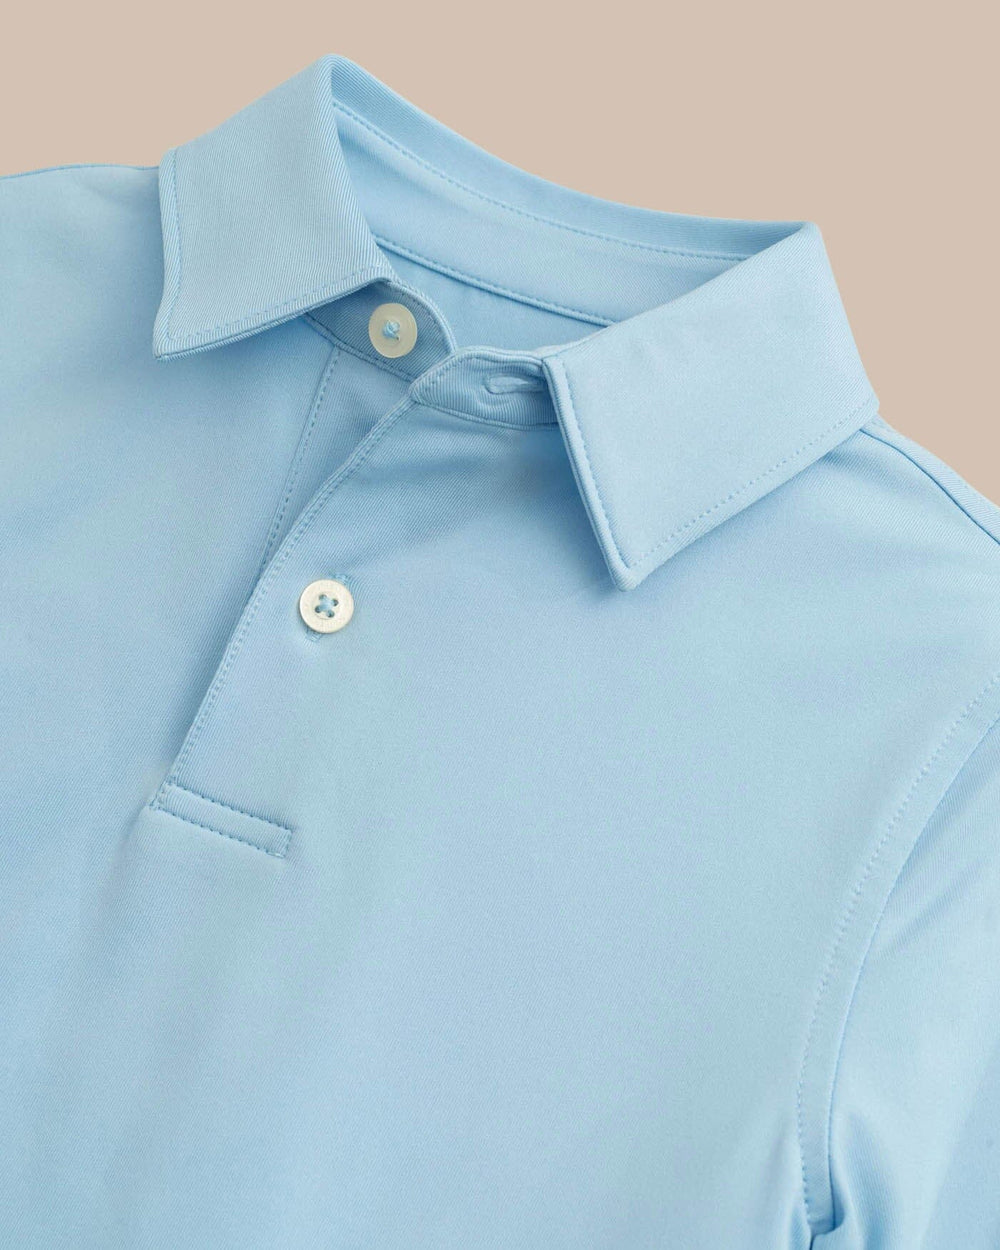 The detail view of the Boys Driver Performance Polo Shirt by Southern Tide - Sky Blue